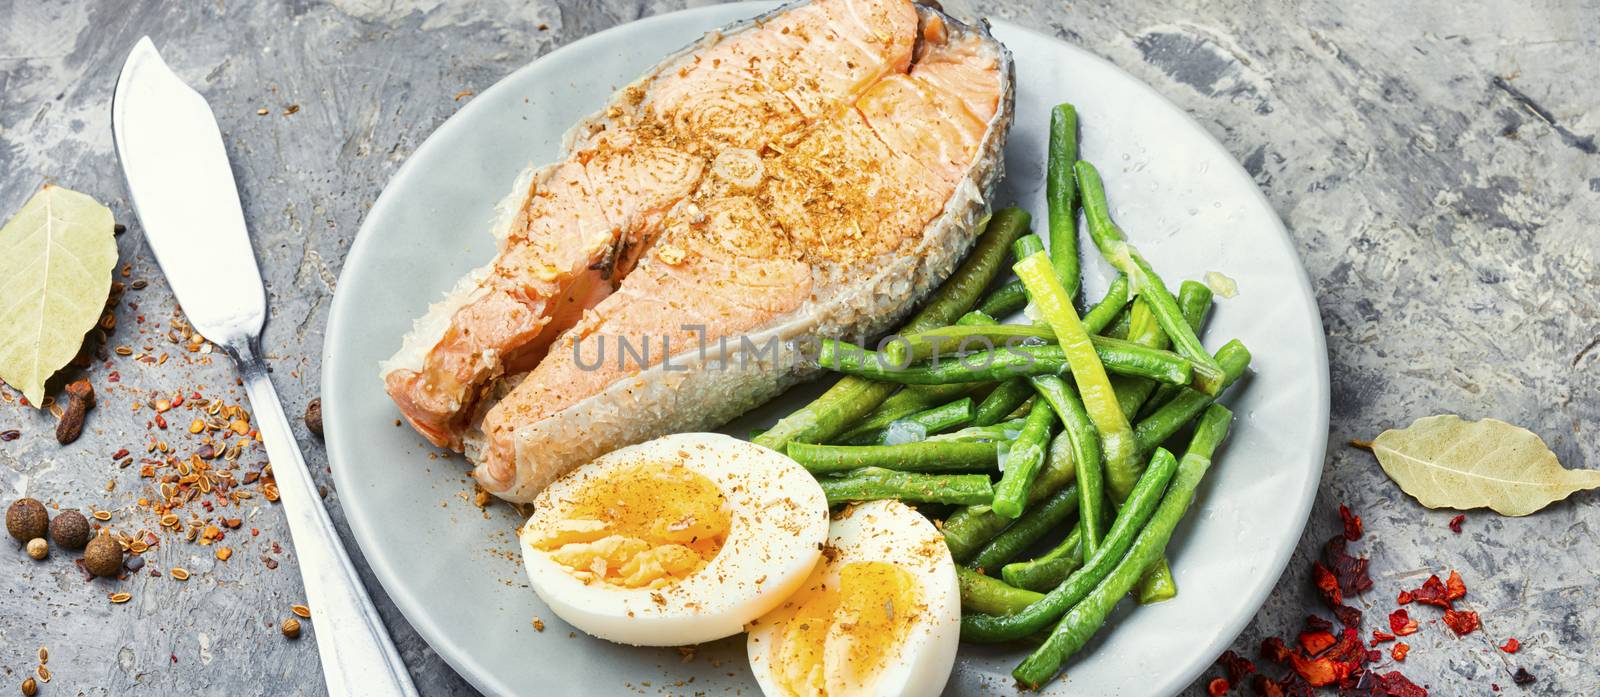 Boiled fish with asparagus and egg.Dietary salmon,boiled salmon